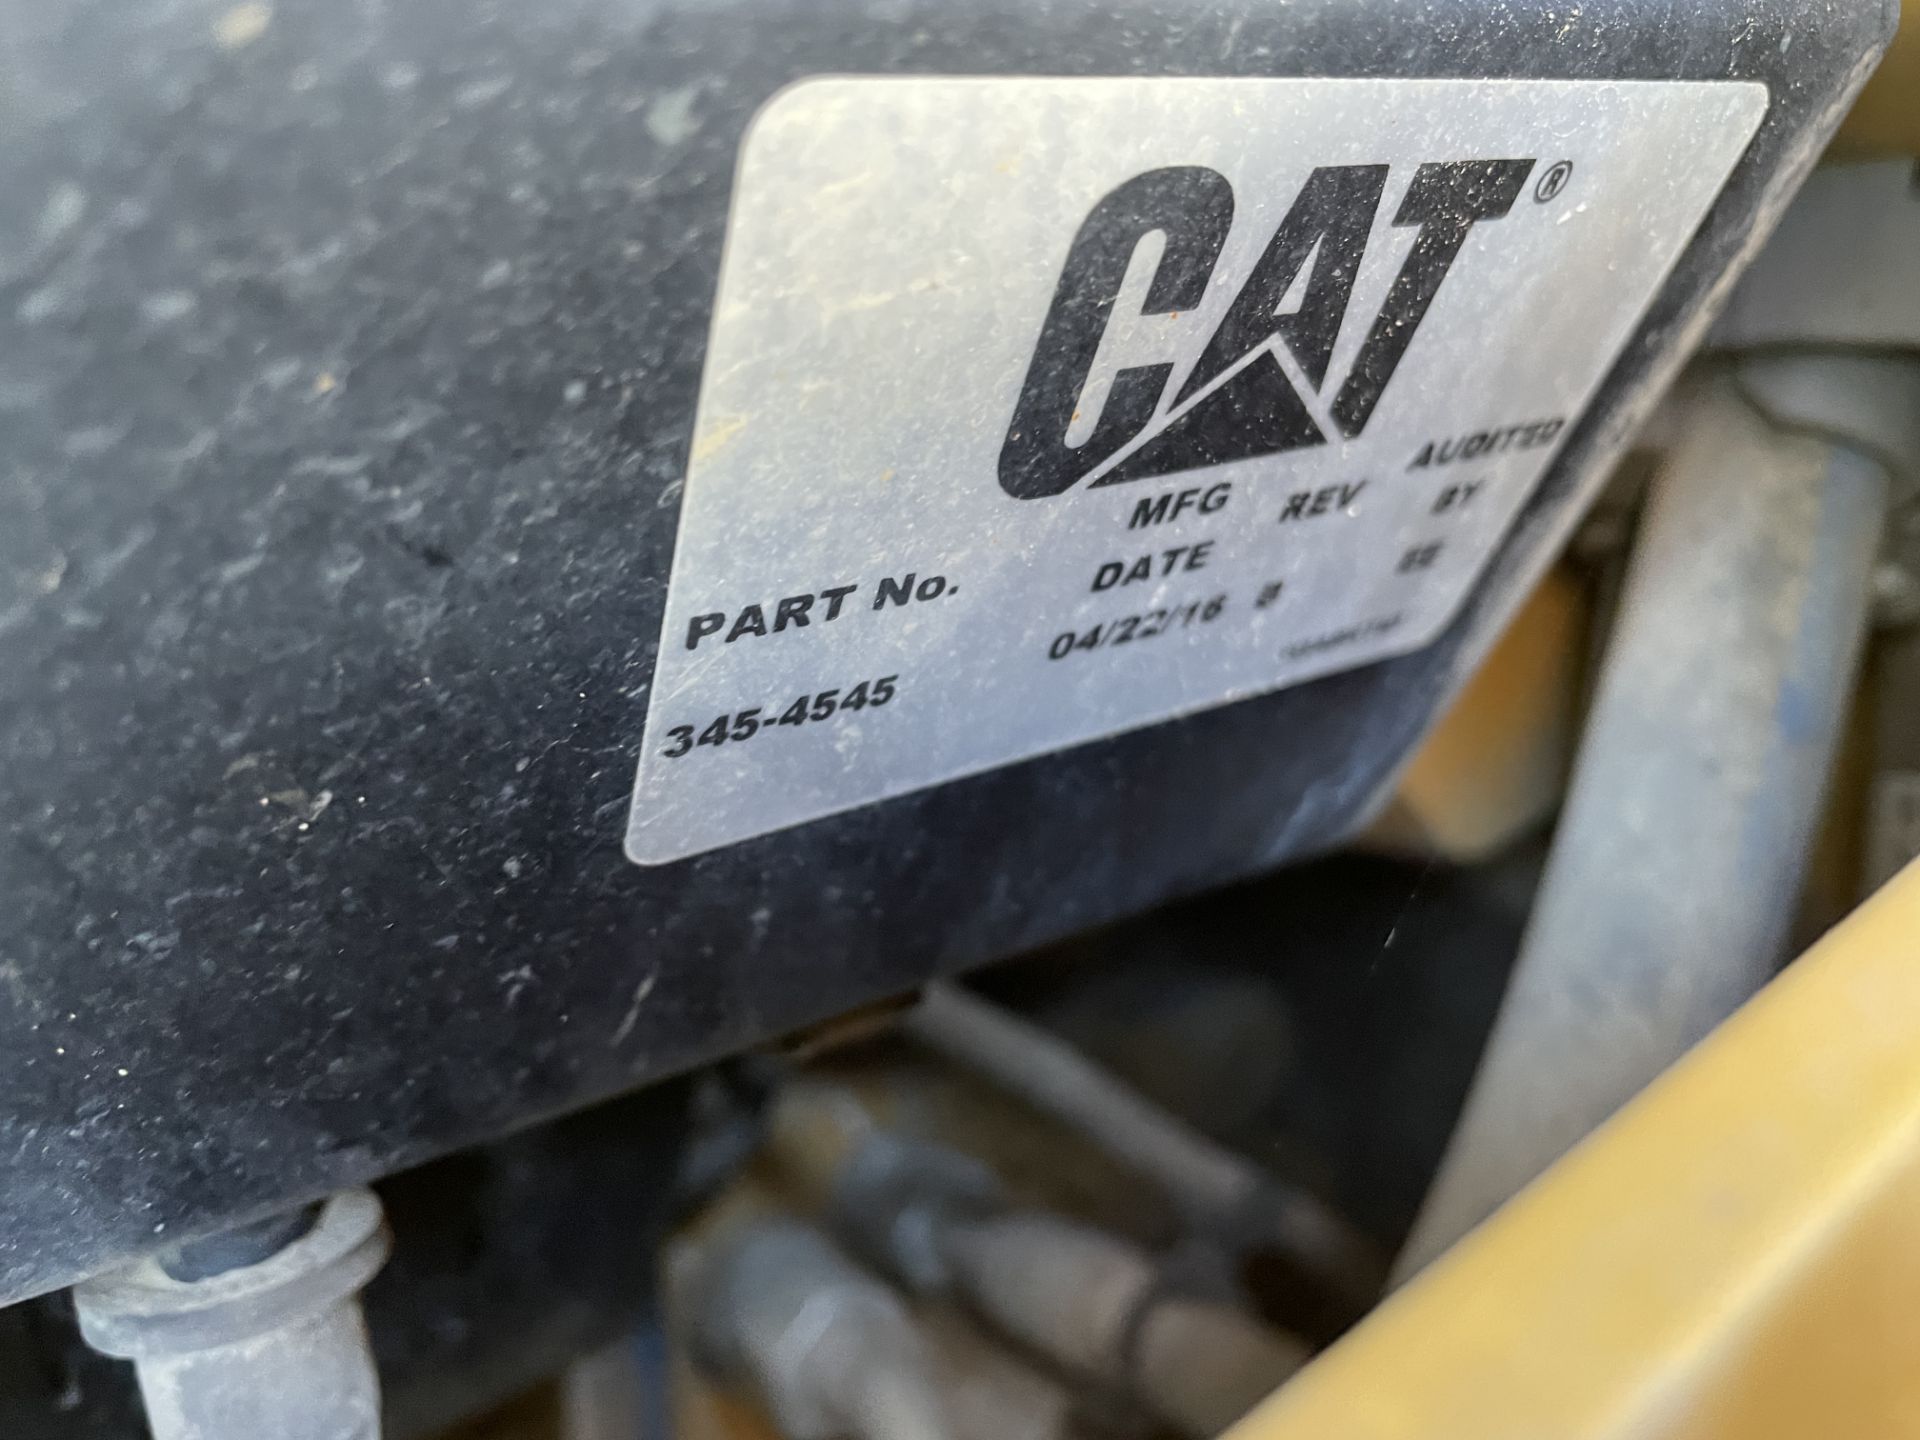 2016 Cat 259D Skid Steer Hours 932.2, Two Speed, Backup Cam, A/C & Heat, W/ 6' Cat Bucket - Image 10 of 11